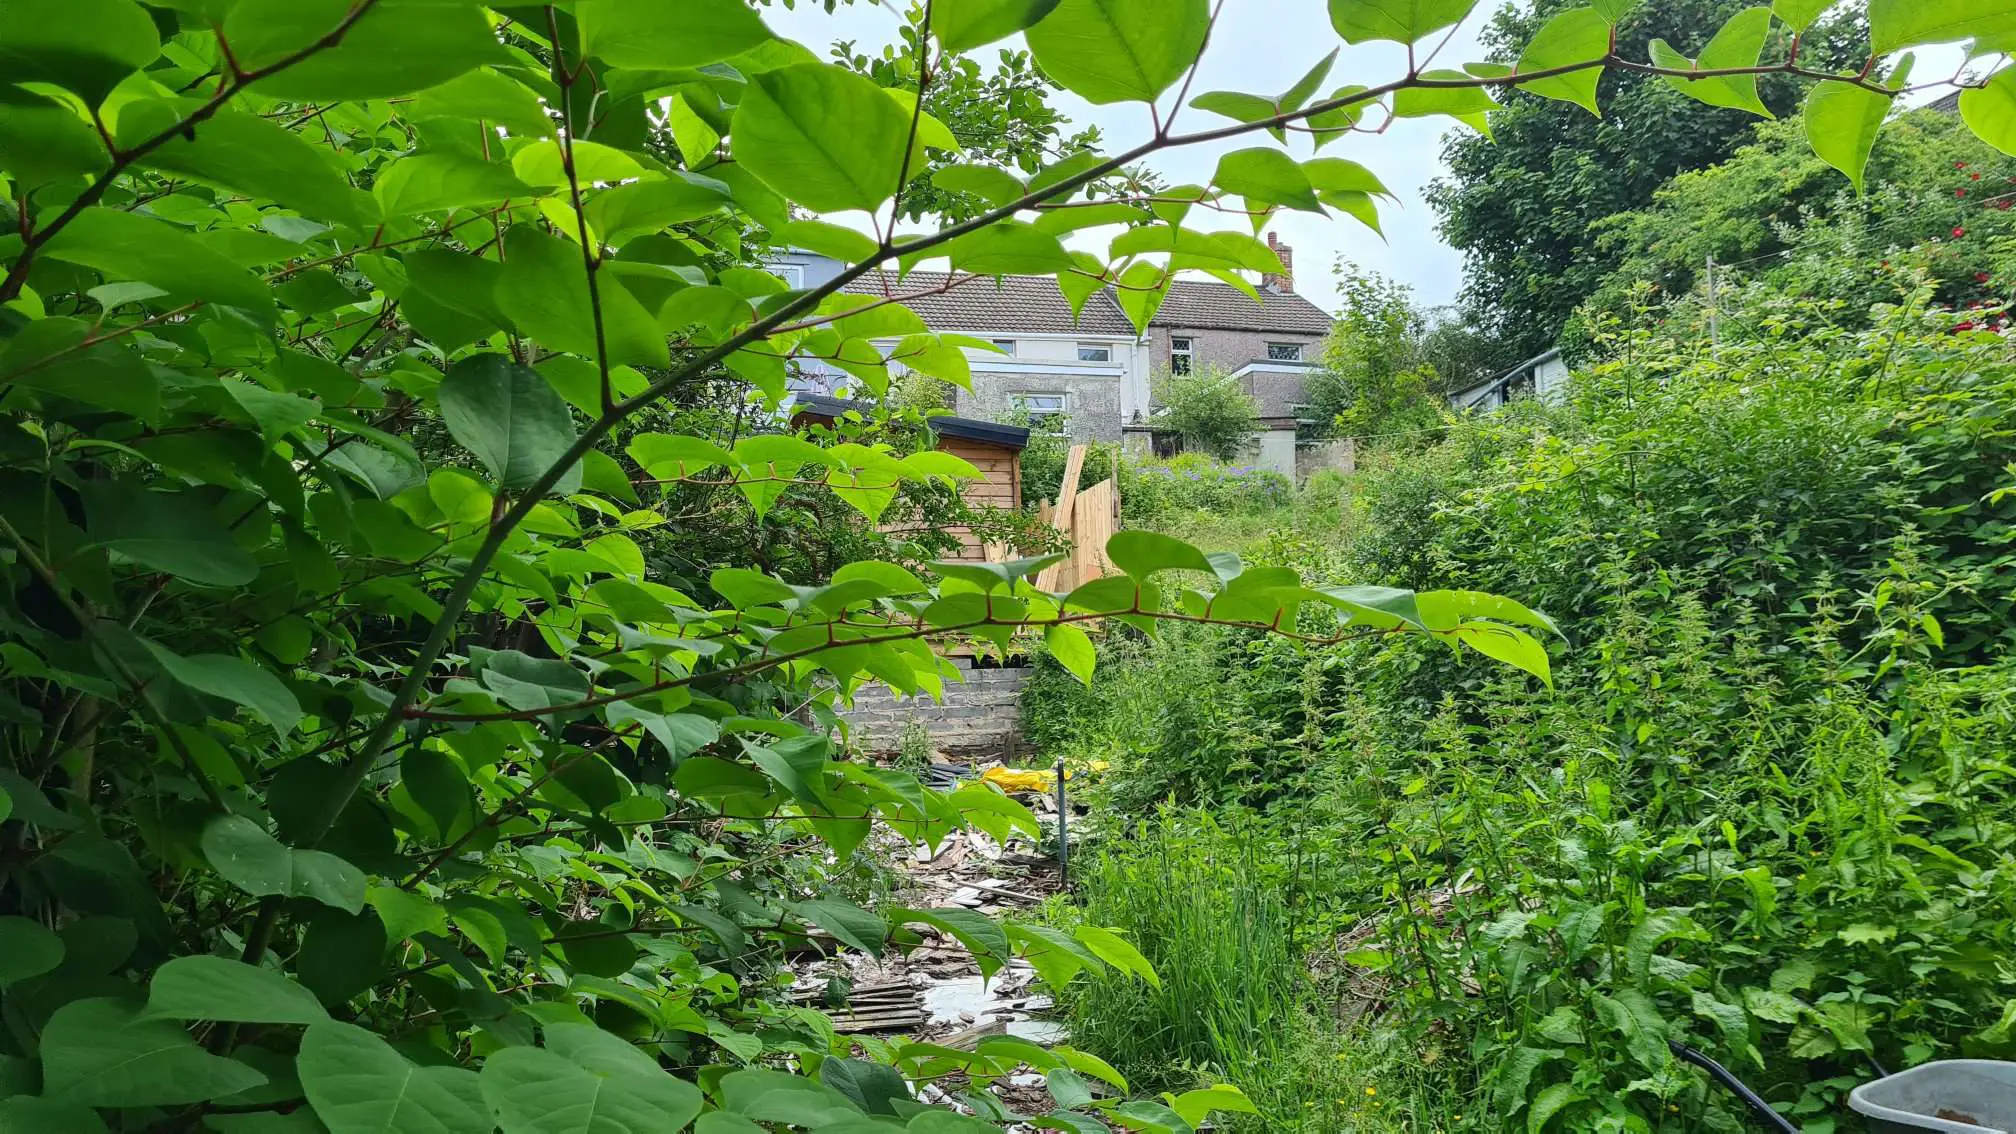 Japanese knotweed can consume a garden and encroach quite quickly into neighbouring properties too